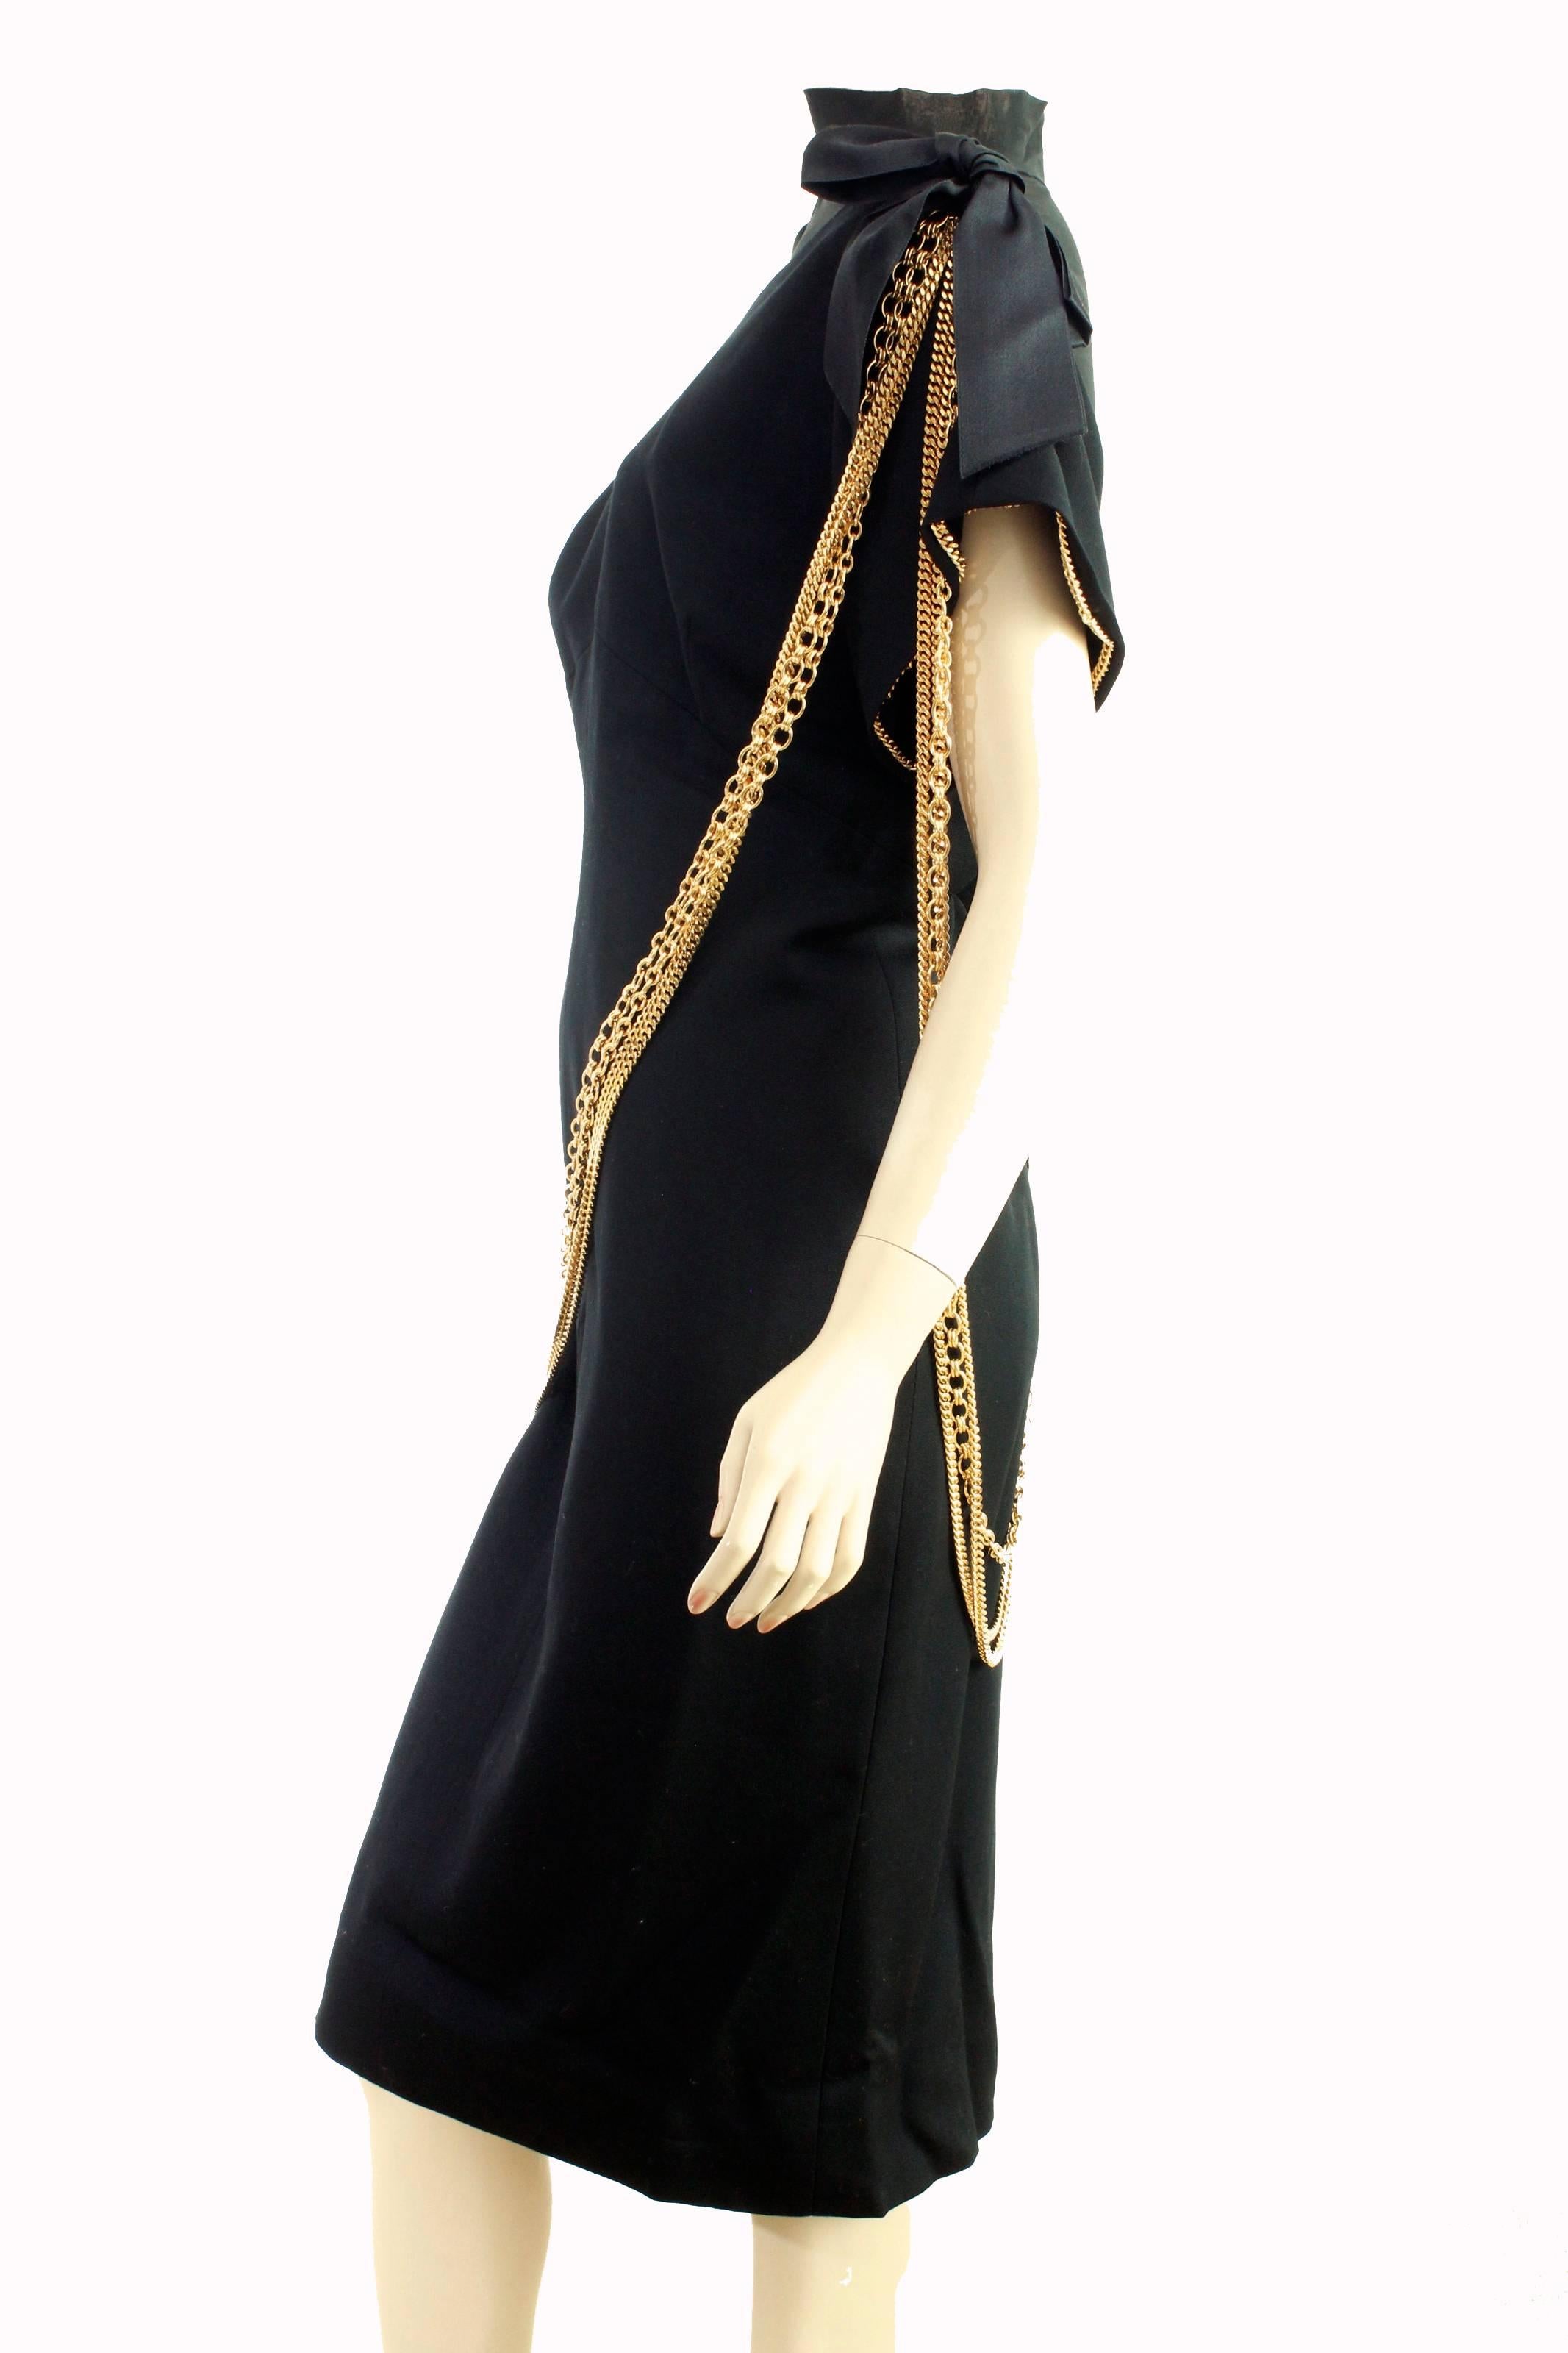 chanel black dress with gold chains